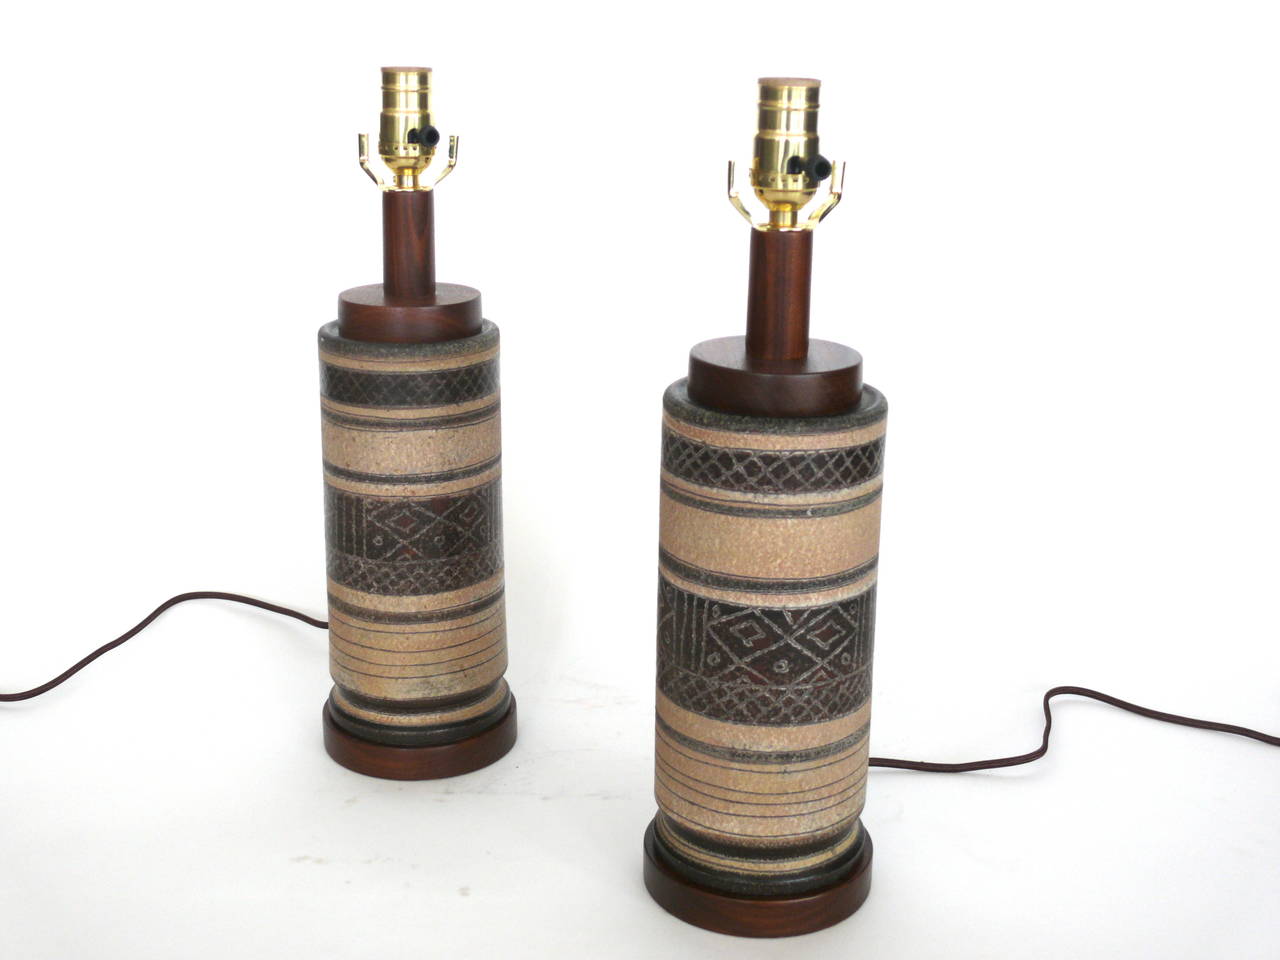 Fantastic pair of wood and ceramic table lamps. Great earth tones and pattern to lamps. Newly rewired. Excellent vintage condition.